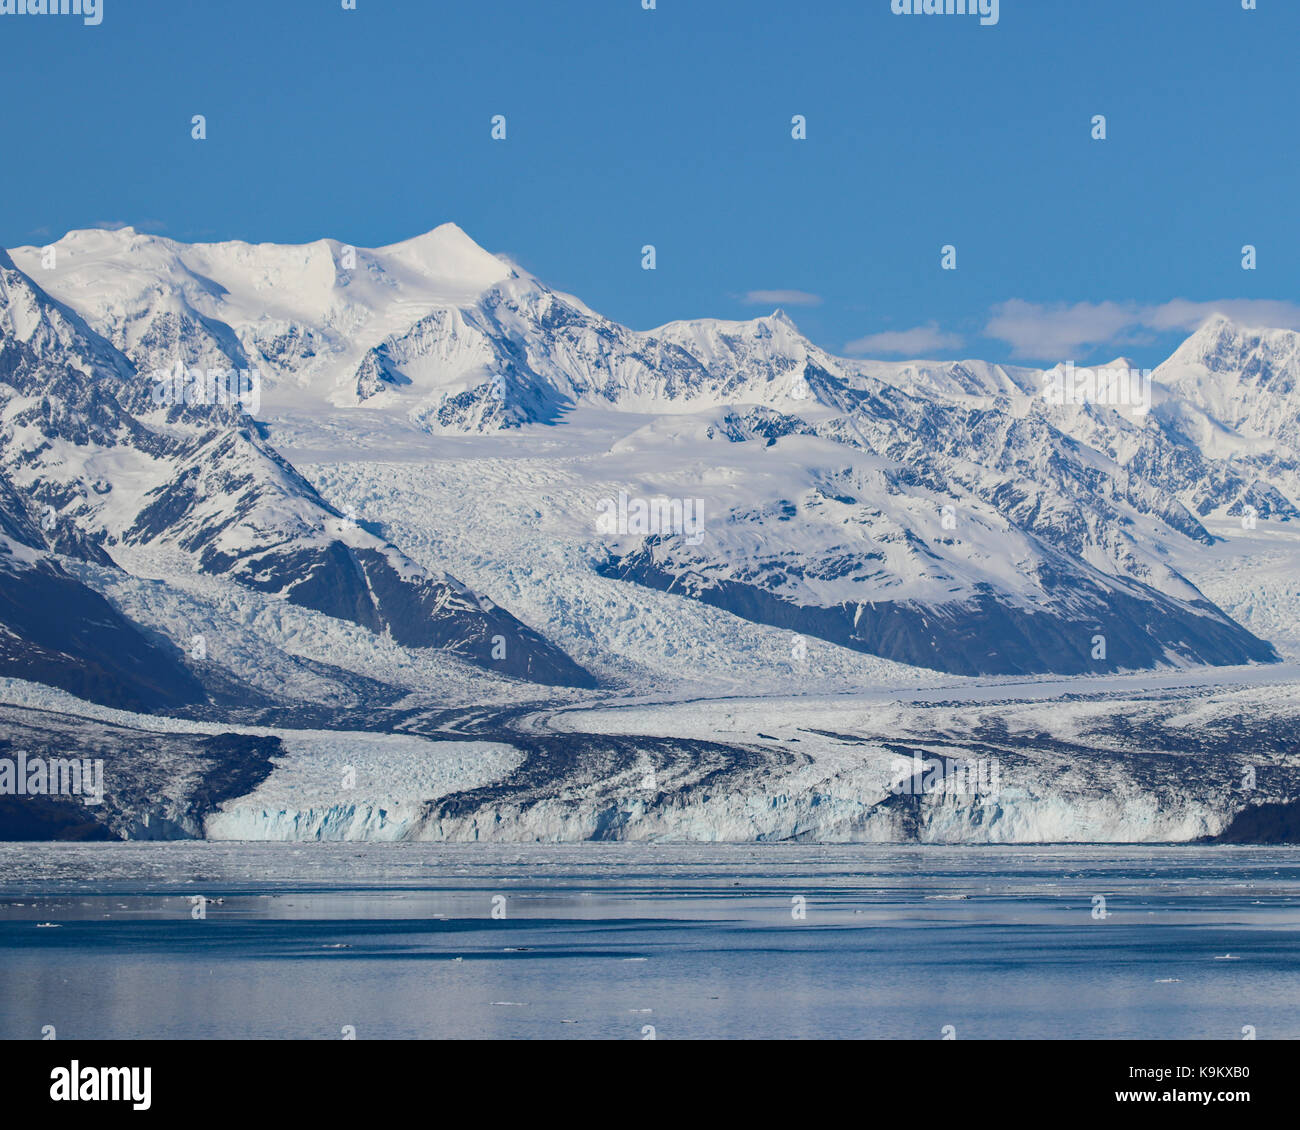 As the cruise ships pause in Prince William Sound, Alaska, there are beautiful views of the Harvard glacier with it's distinctive striped colors Stock Photo